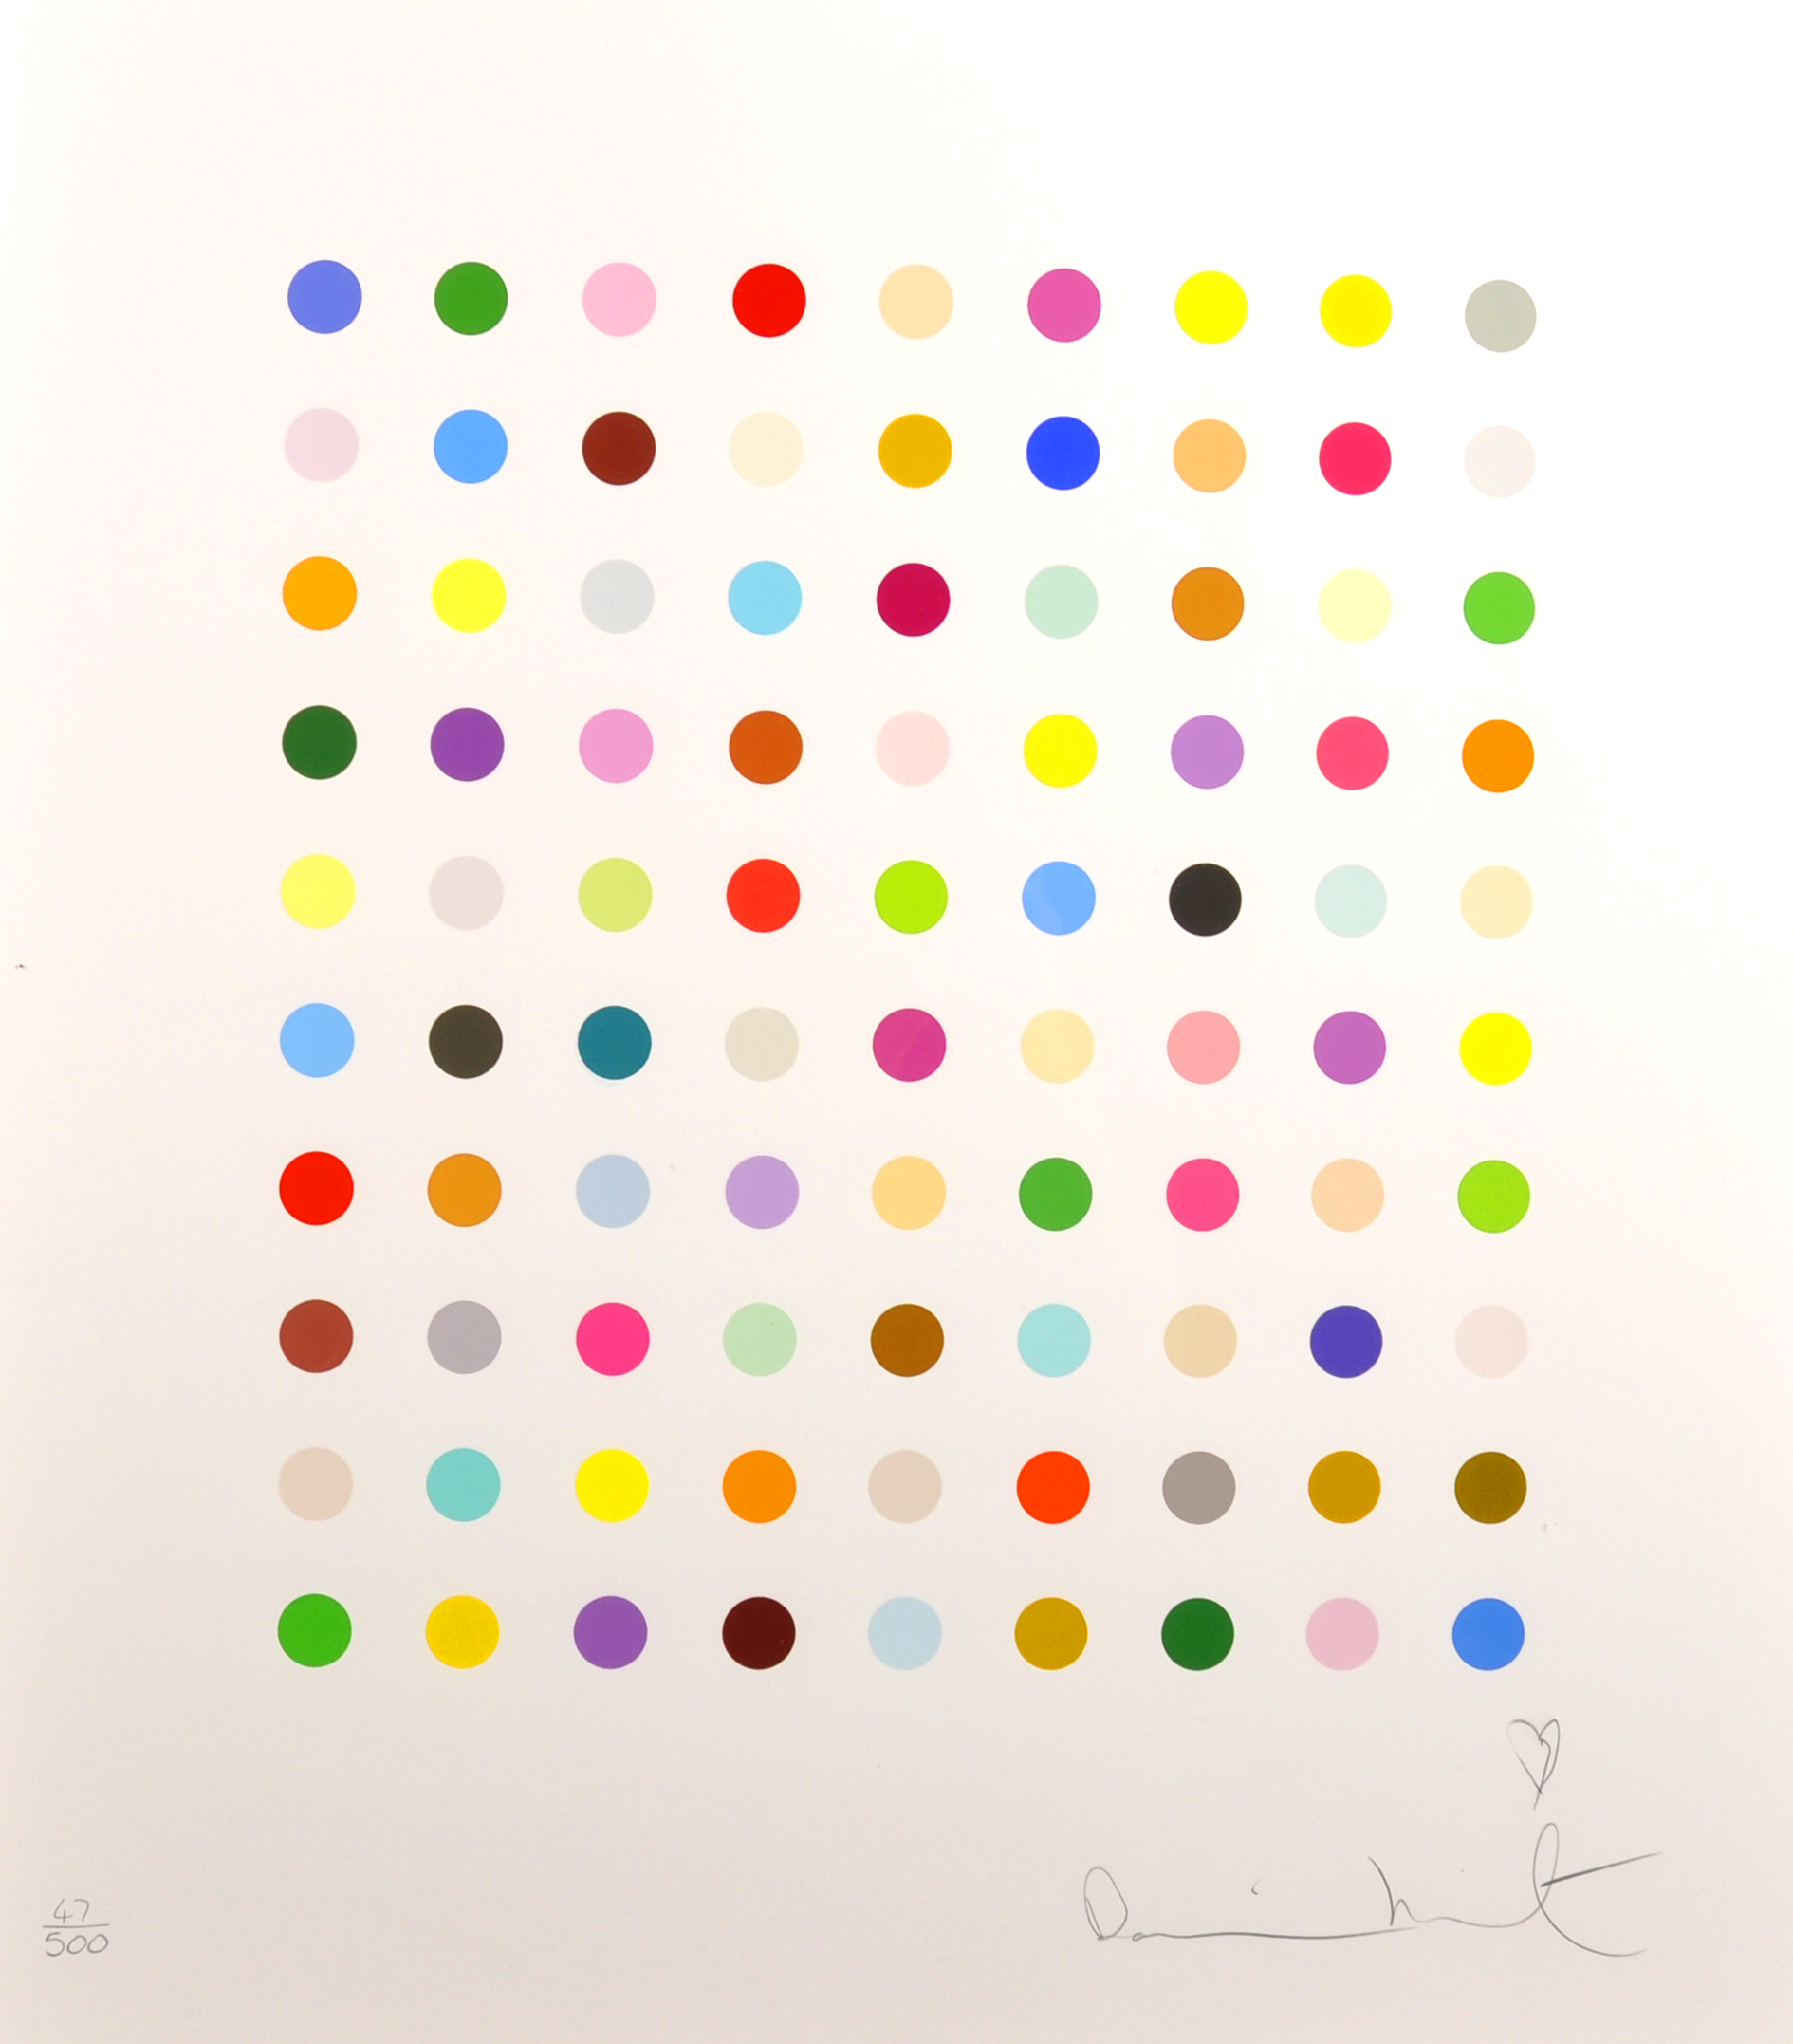 Damien Hirst (1965- ) British. "Spot", with Ninety Colour Spots on a White background, Limited